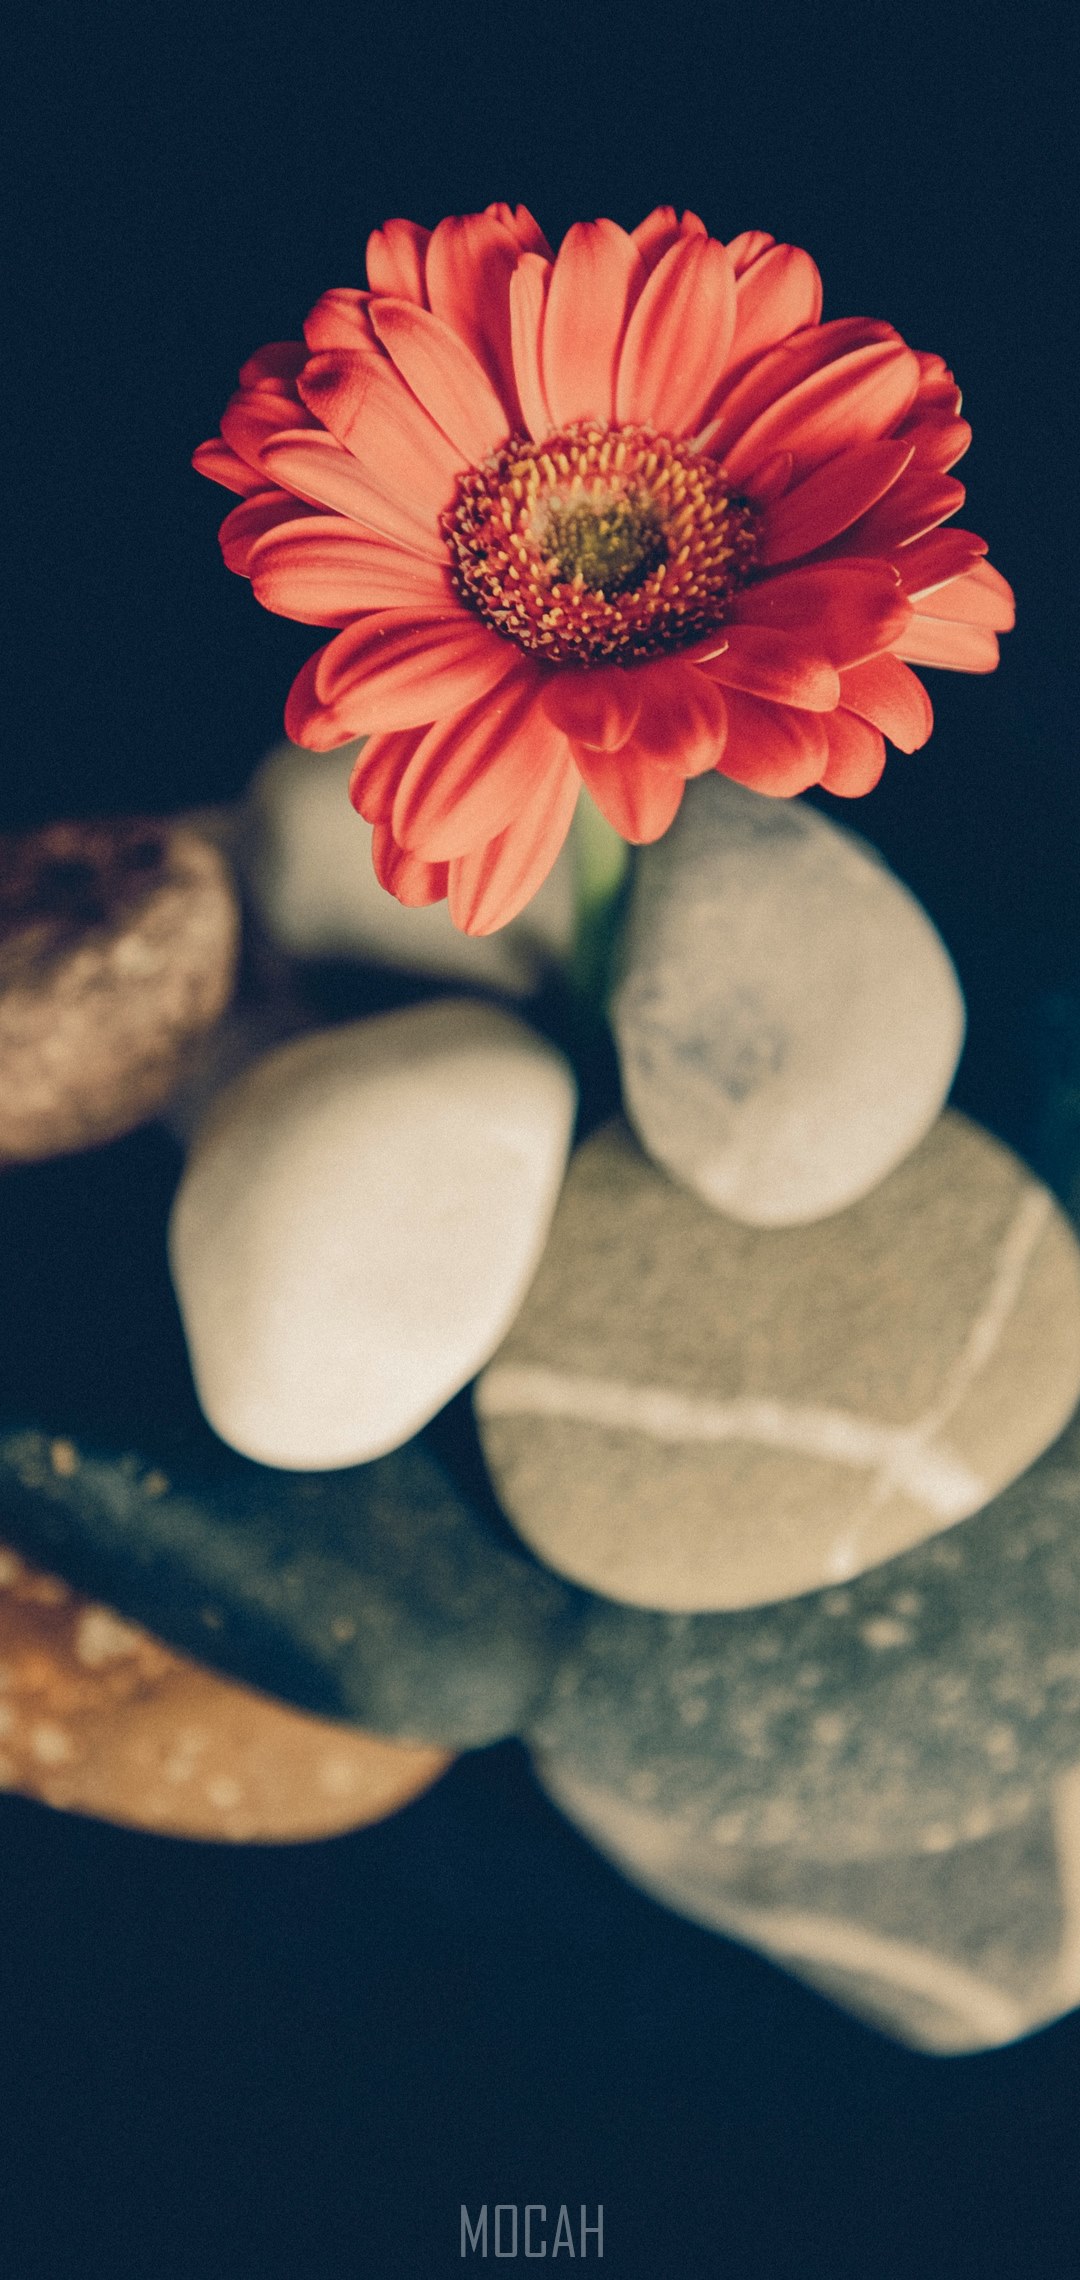 a single red aster flower on large pebbles, beautiful flower on pebbles, Samsung Galaxy A40 screensaver hd, 1080x2280 Gallery HD Wallpaper